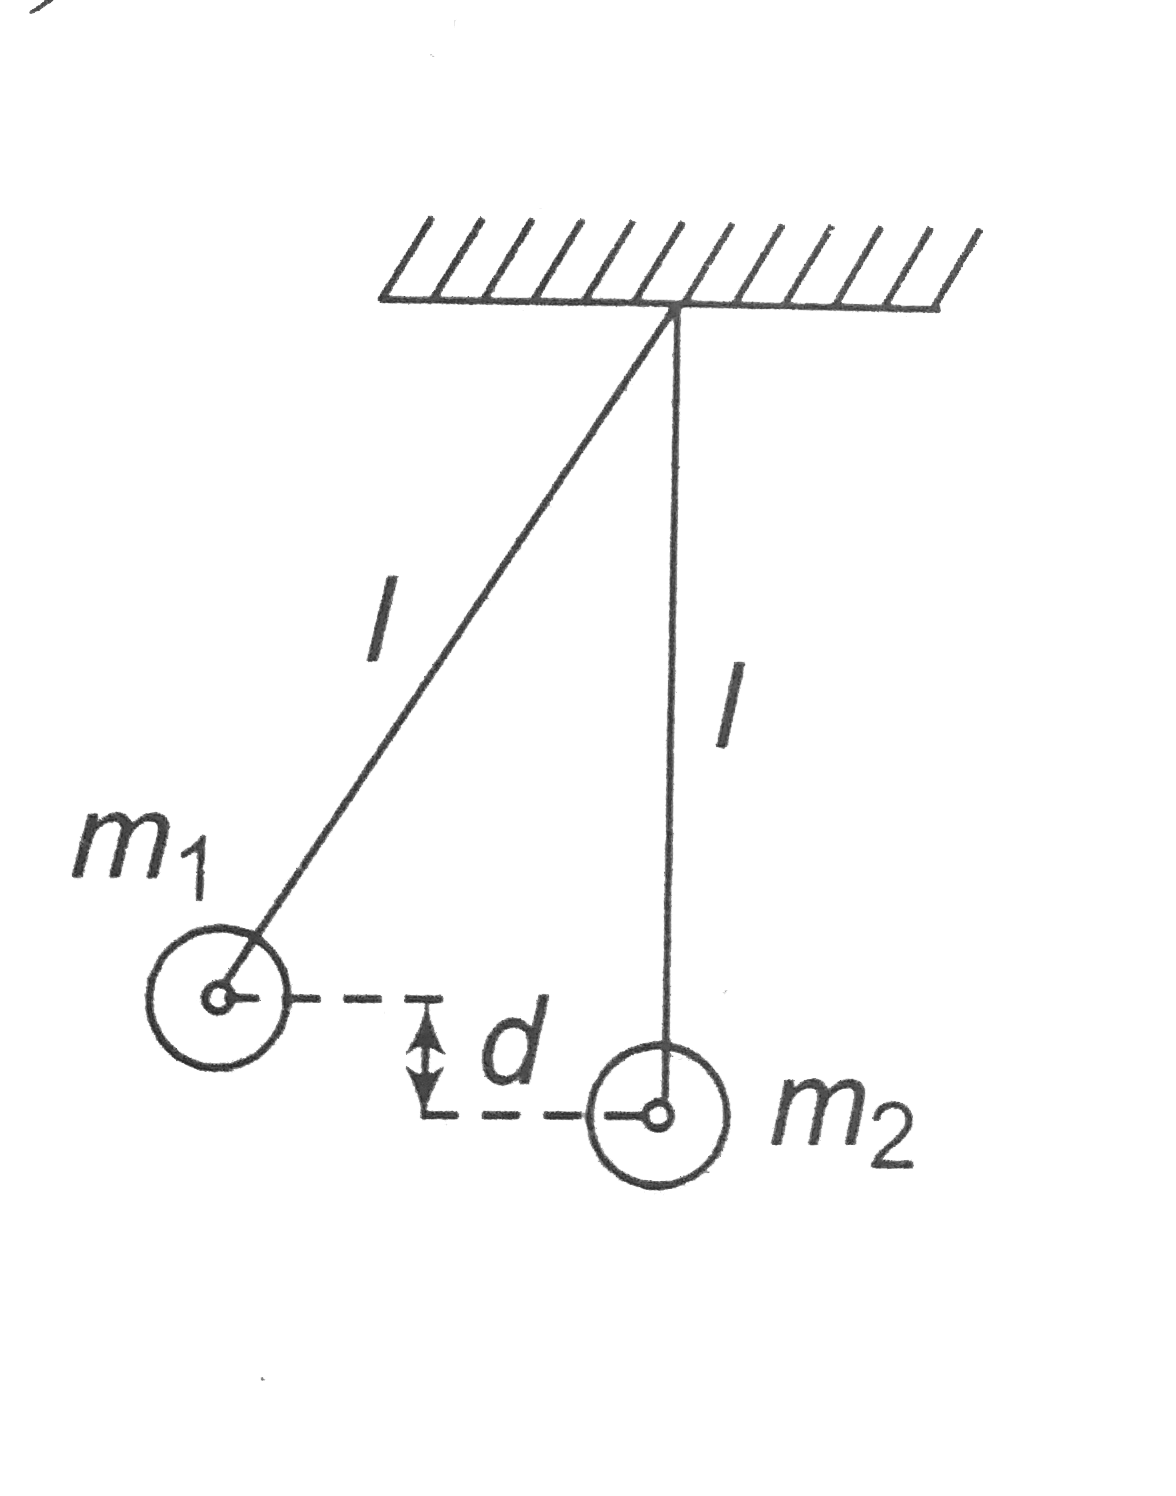 Two pendulum each of length l are initial situated as shown in figure. The first pendulum is released and strikes the second . Assume that the collision is completely inelastic and neglect the mass of the string and any frictional effects. How high does the center of mass rise after the collision?